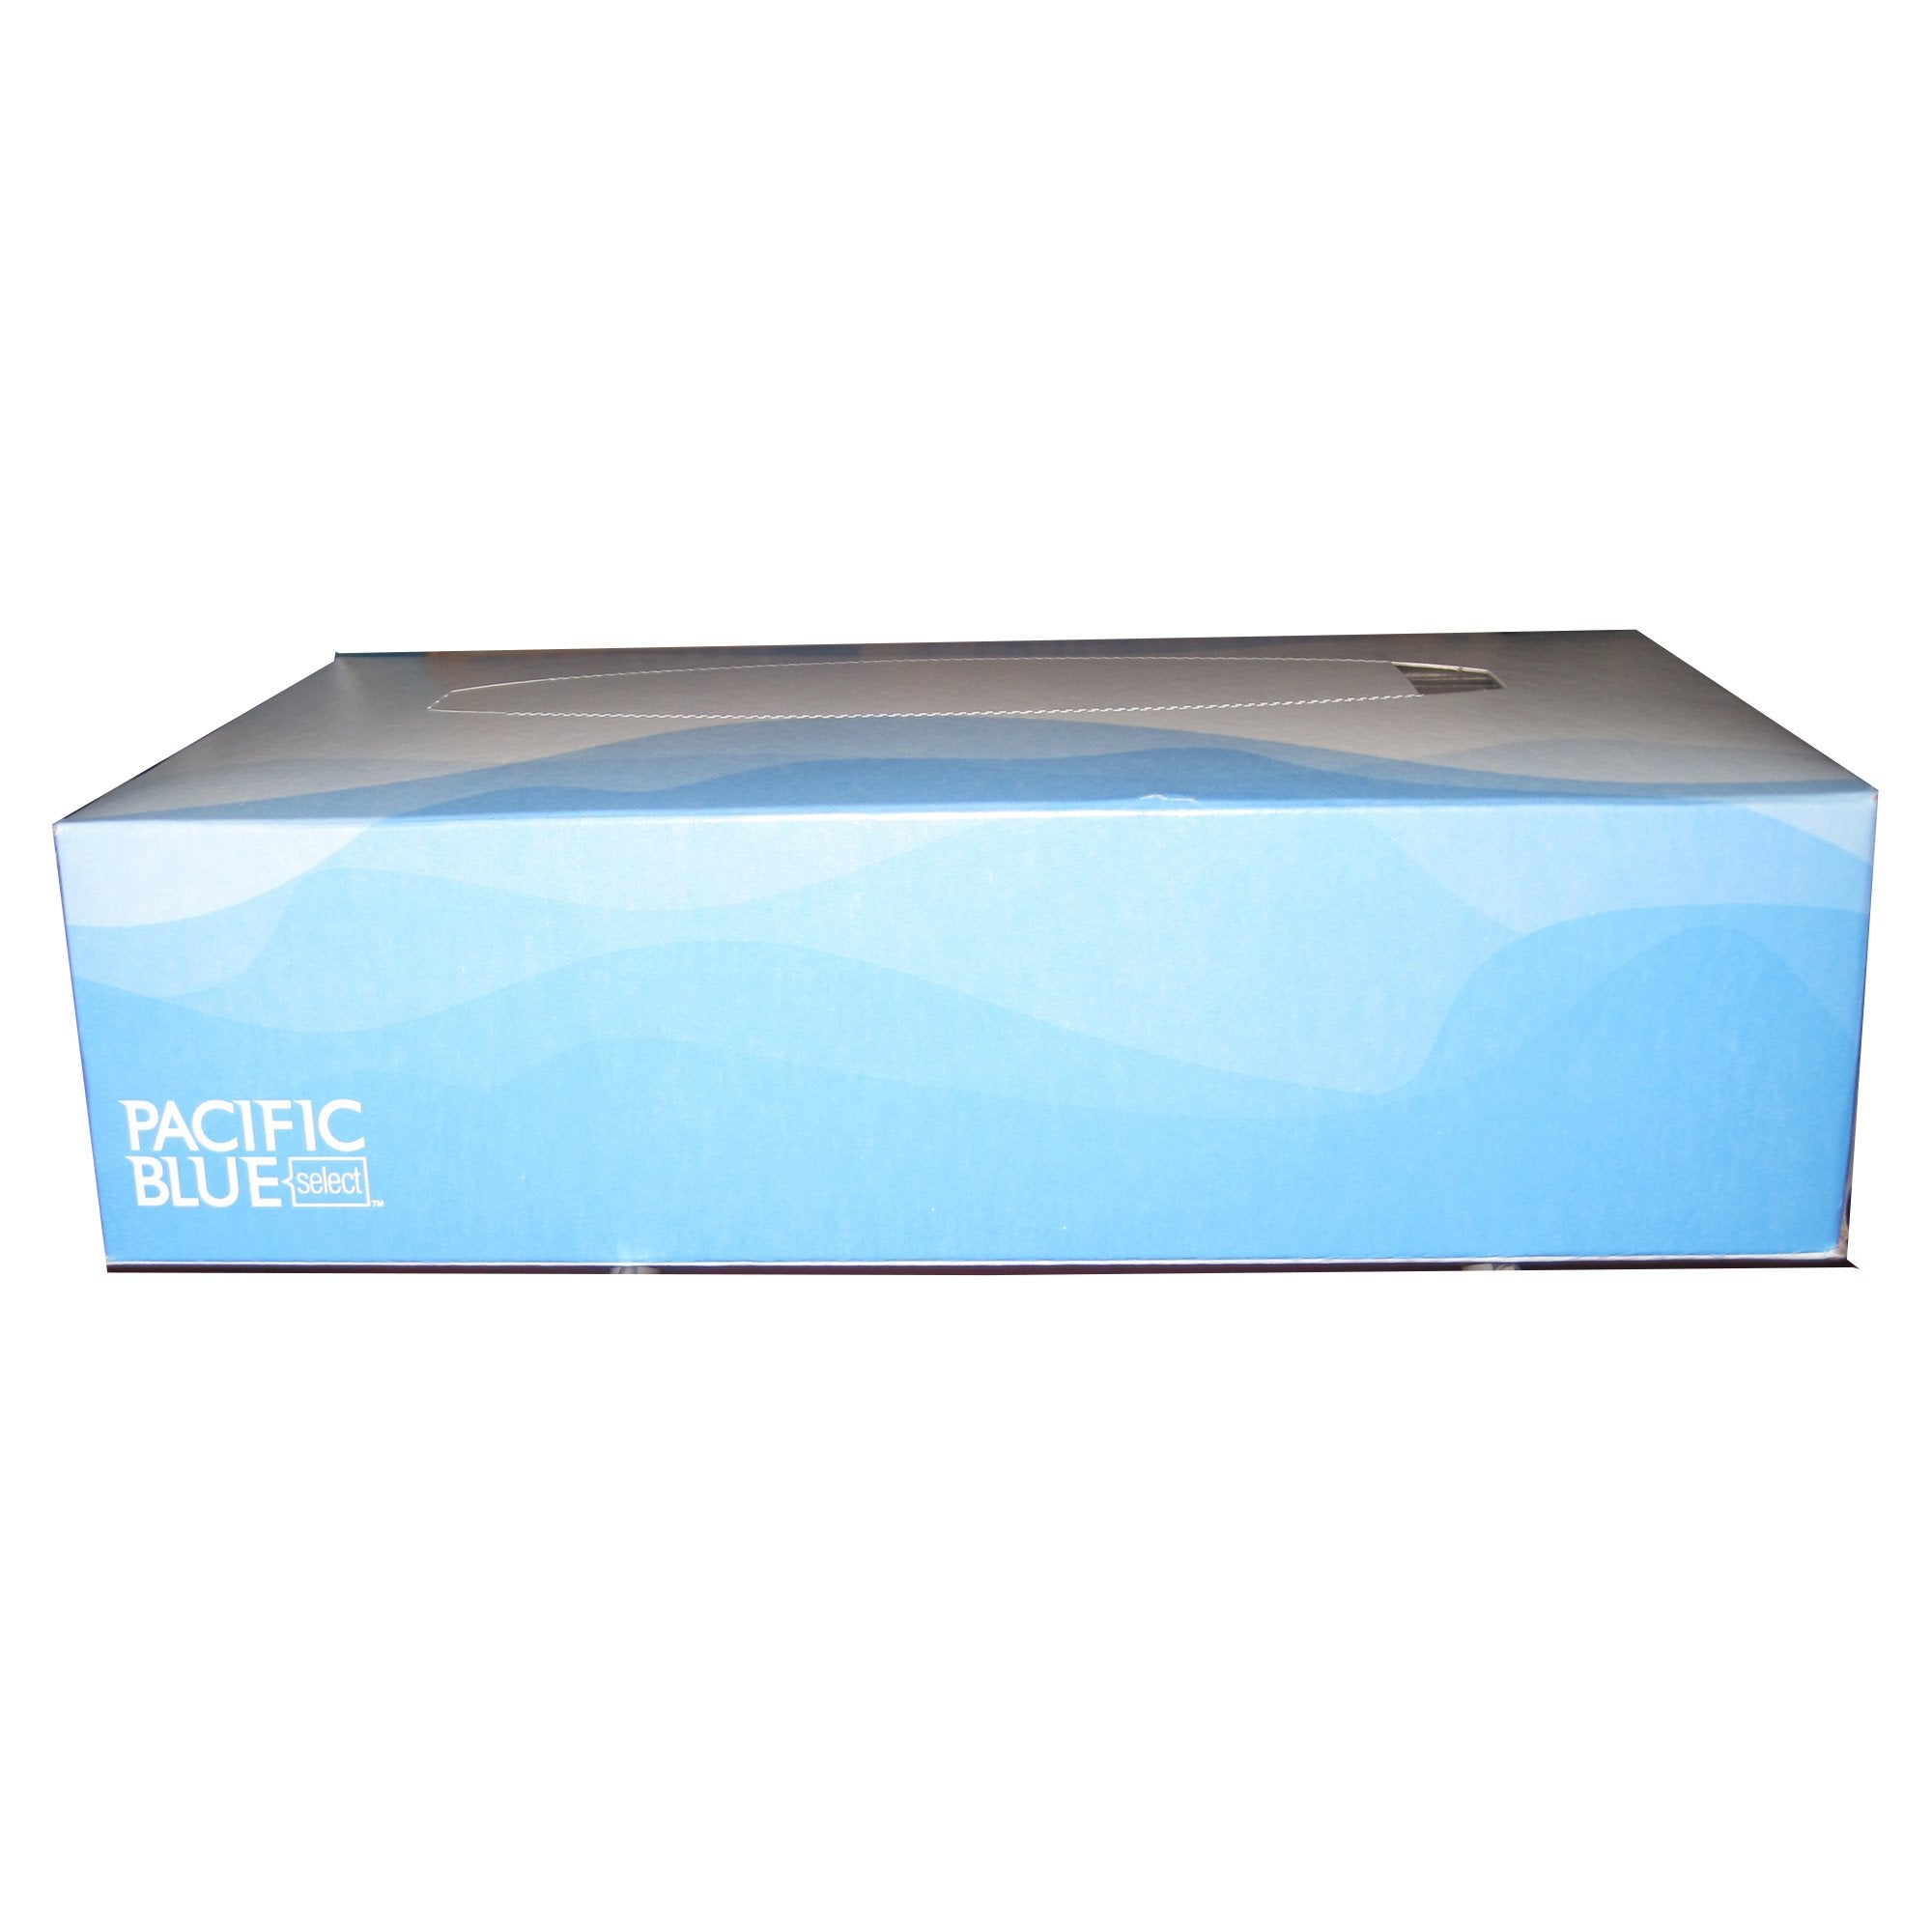 Pacific Blue Select Facial Tissue White 7-15/16 X 4-3/4 X 2 Inch 100 Count